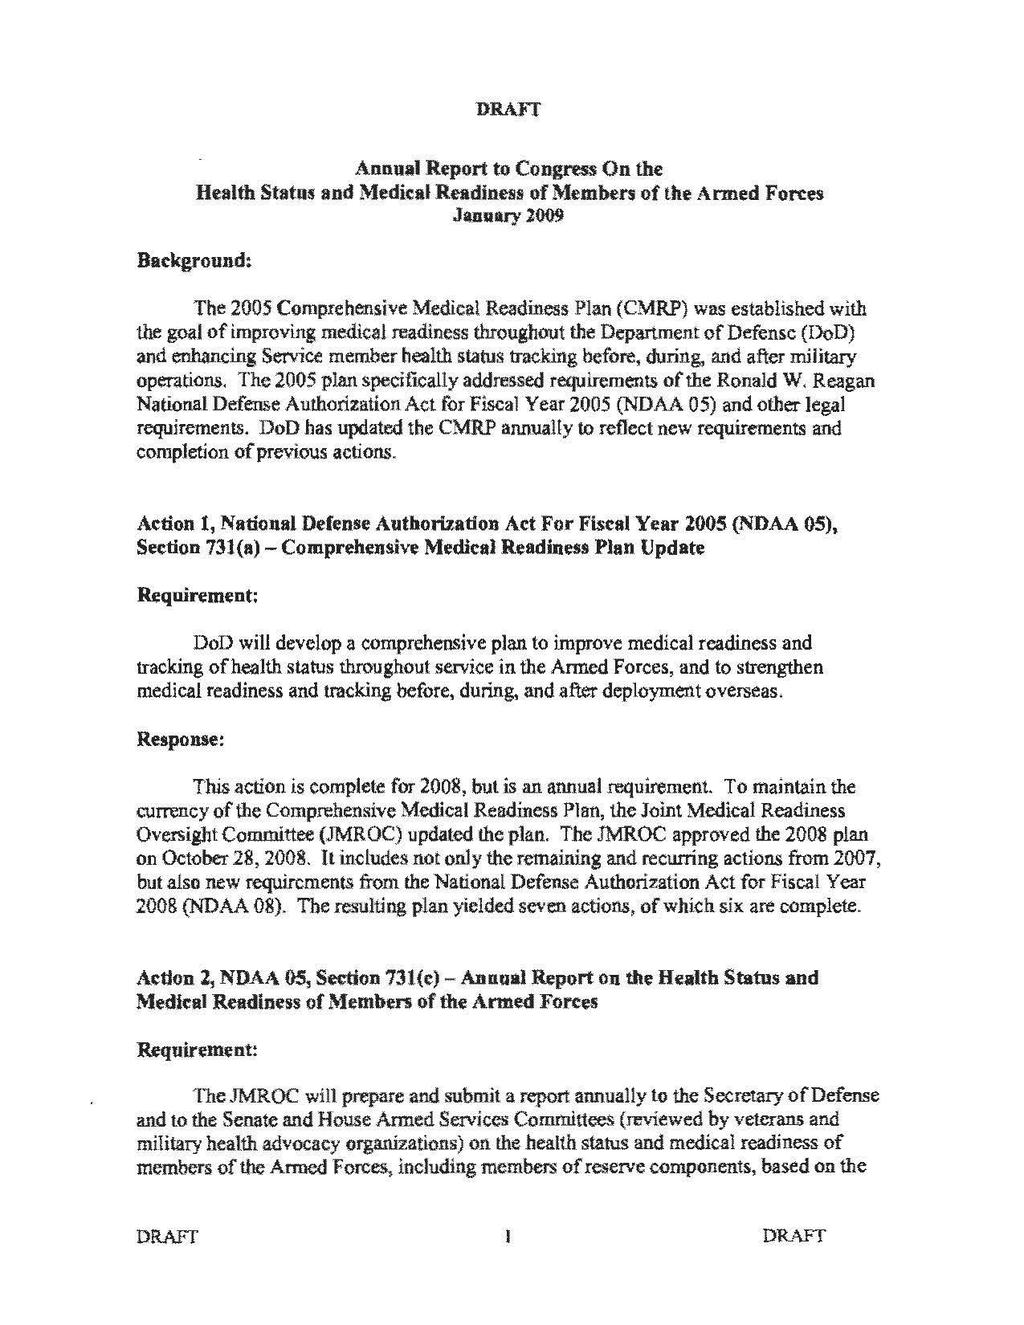 DRAFT Annual Report to Congress On the Healfh Statns and Medical Readiness of Members of the Armed Forces Janallry 2009 Background~ The 2005 Comprehensive Medical Readiness Plan (CMRP) was